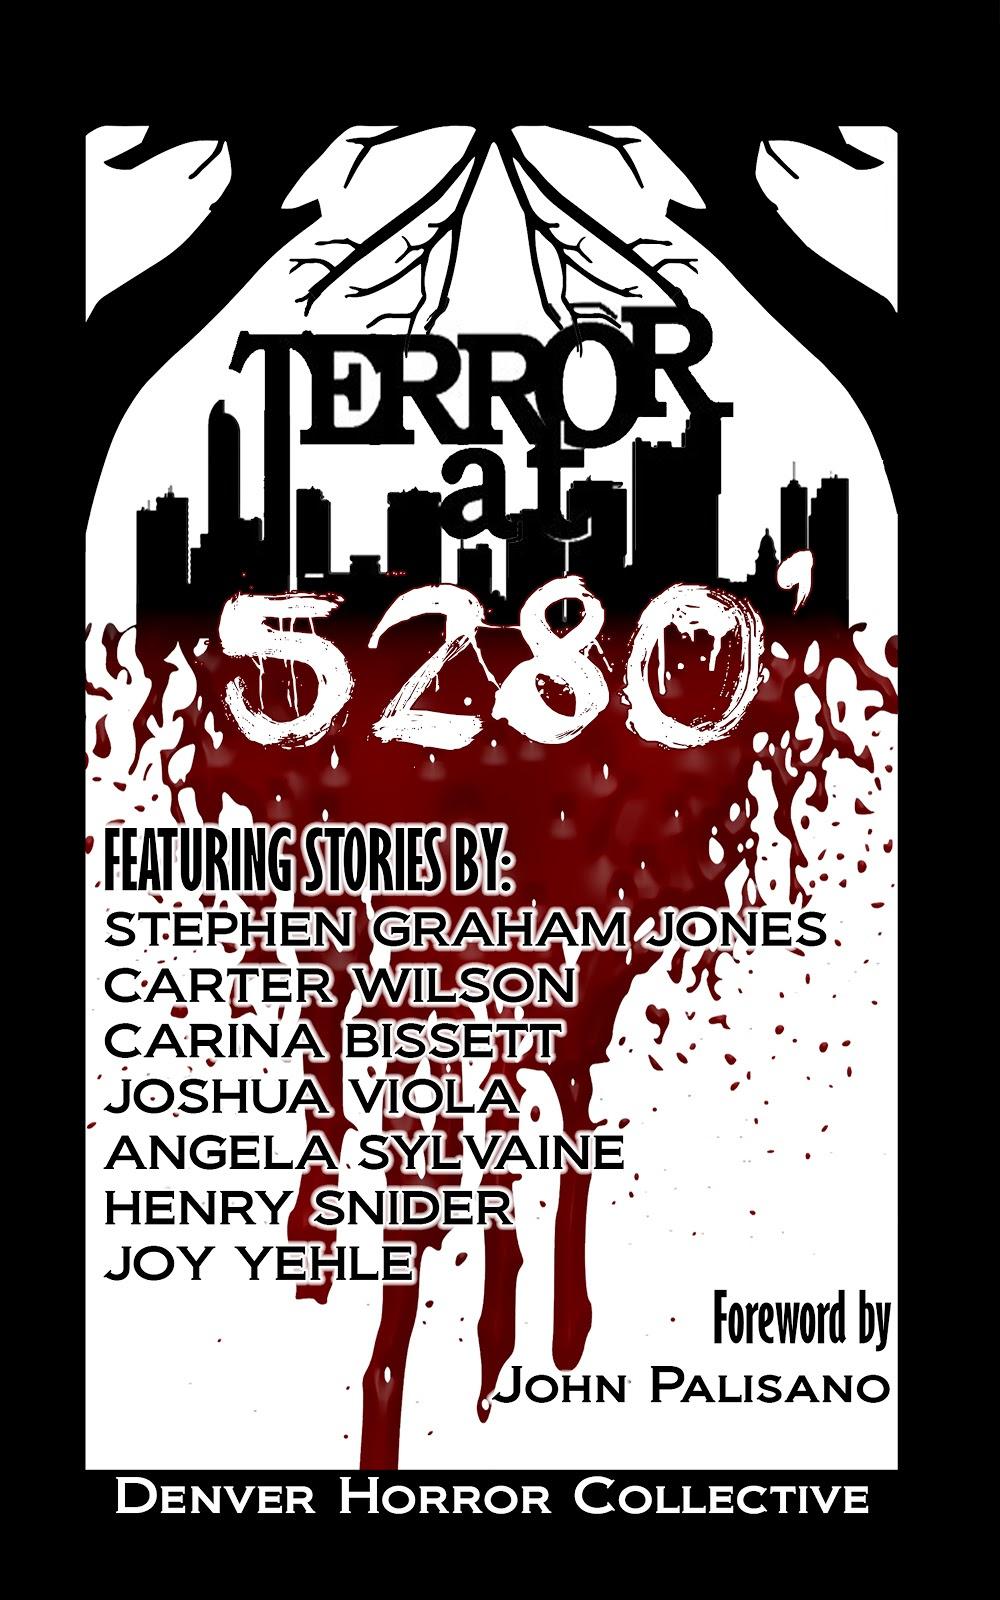 Terror at 5280': Local Dark History and Urban Legends + Book Signing